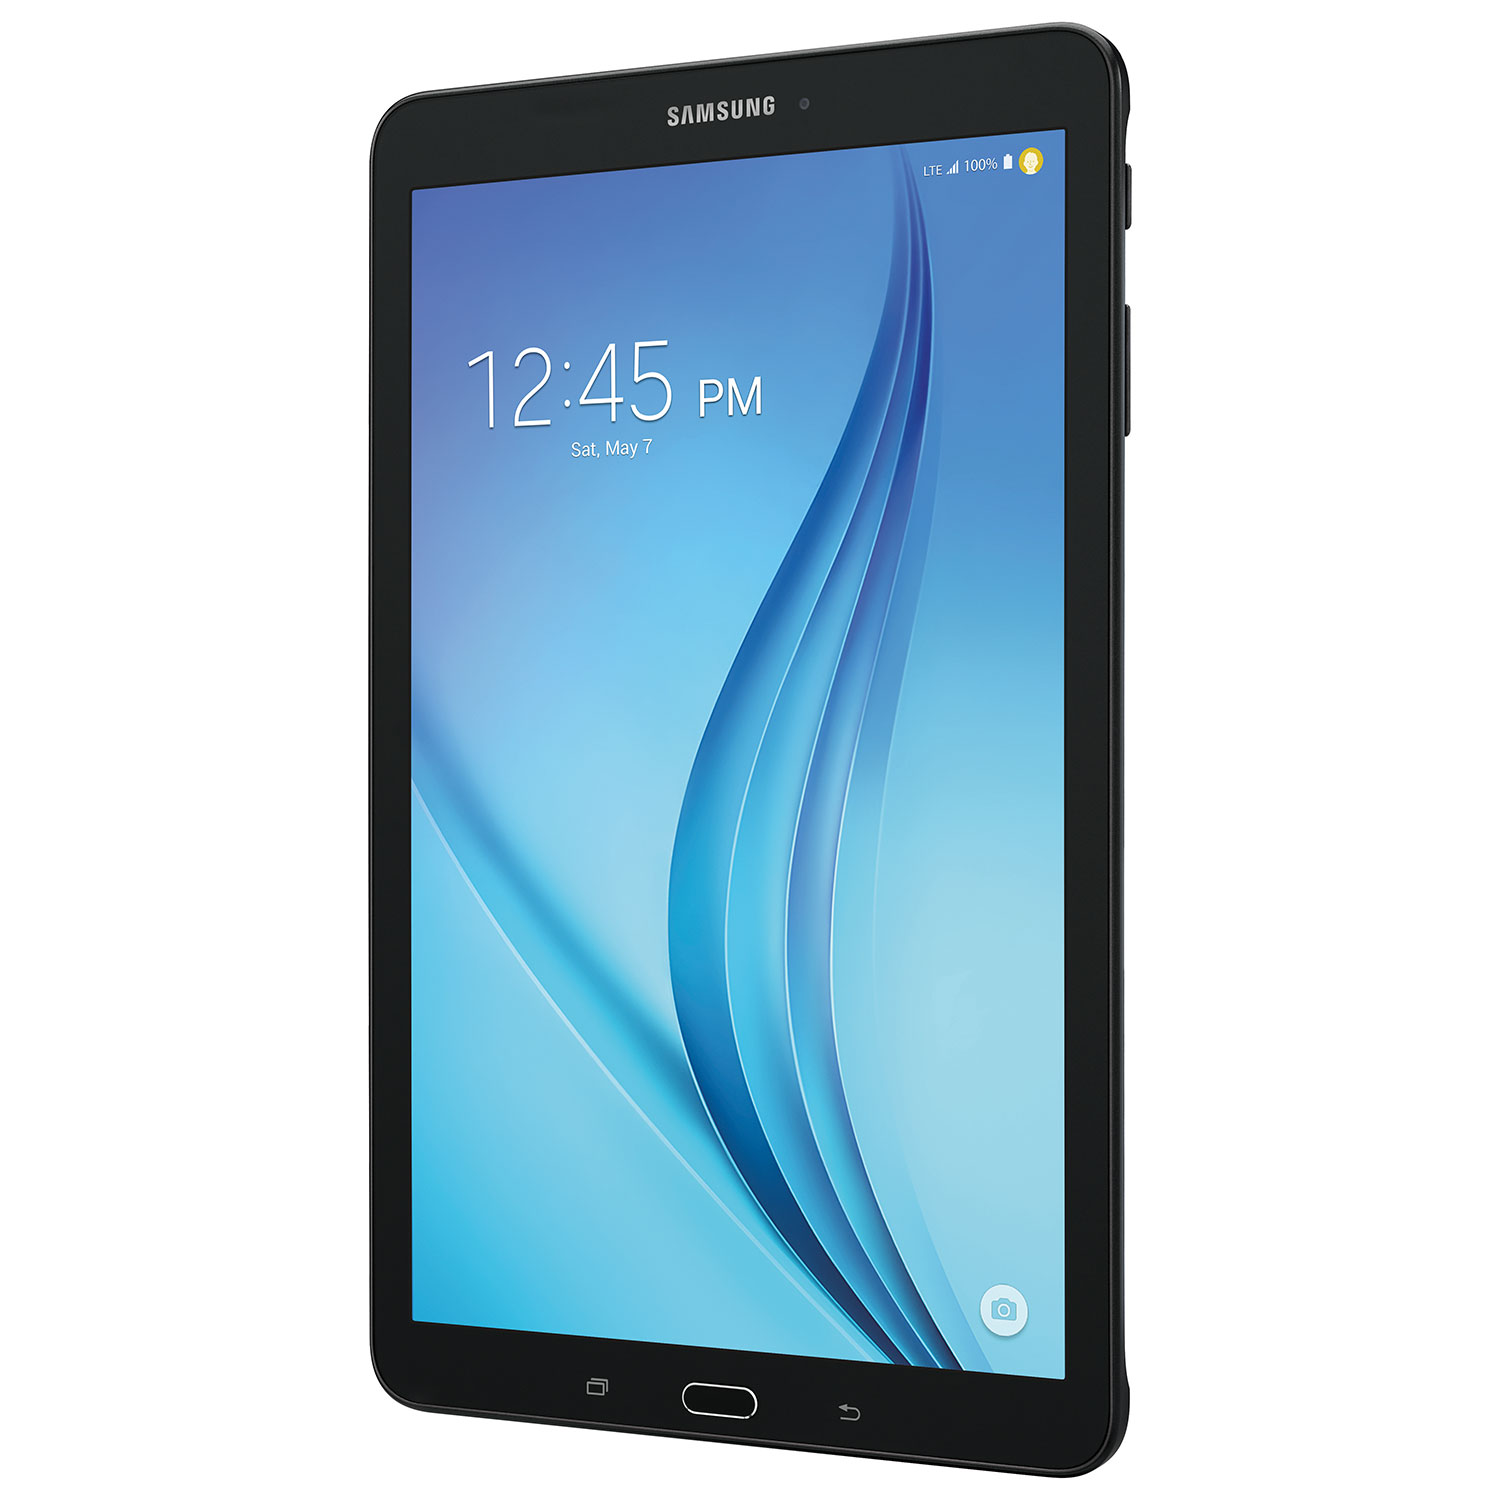 Samsung Galaxy Tab E Android 6.0 LTE Tablet